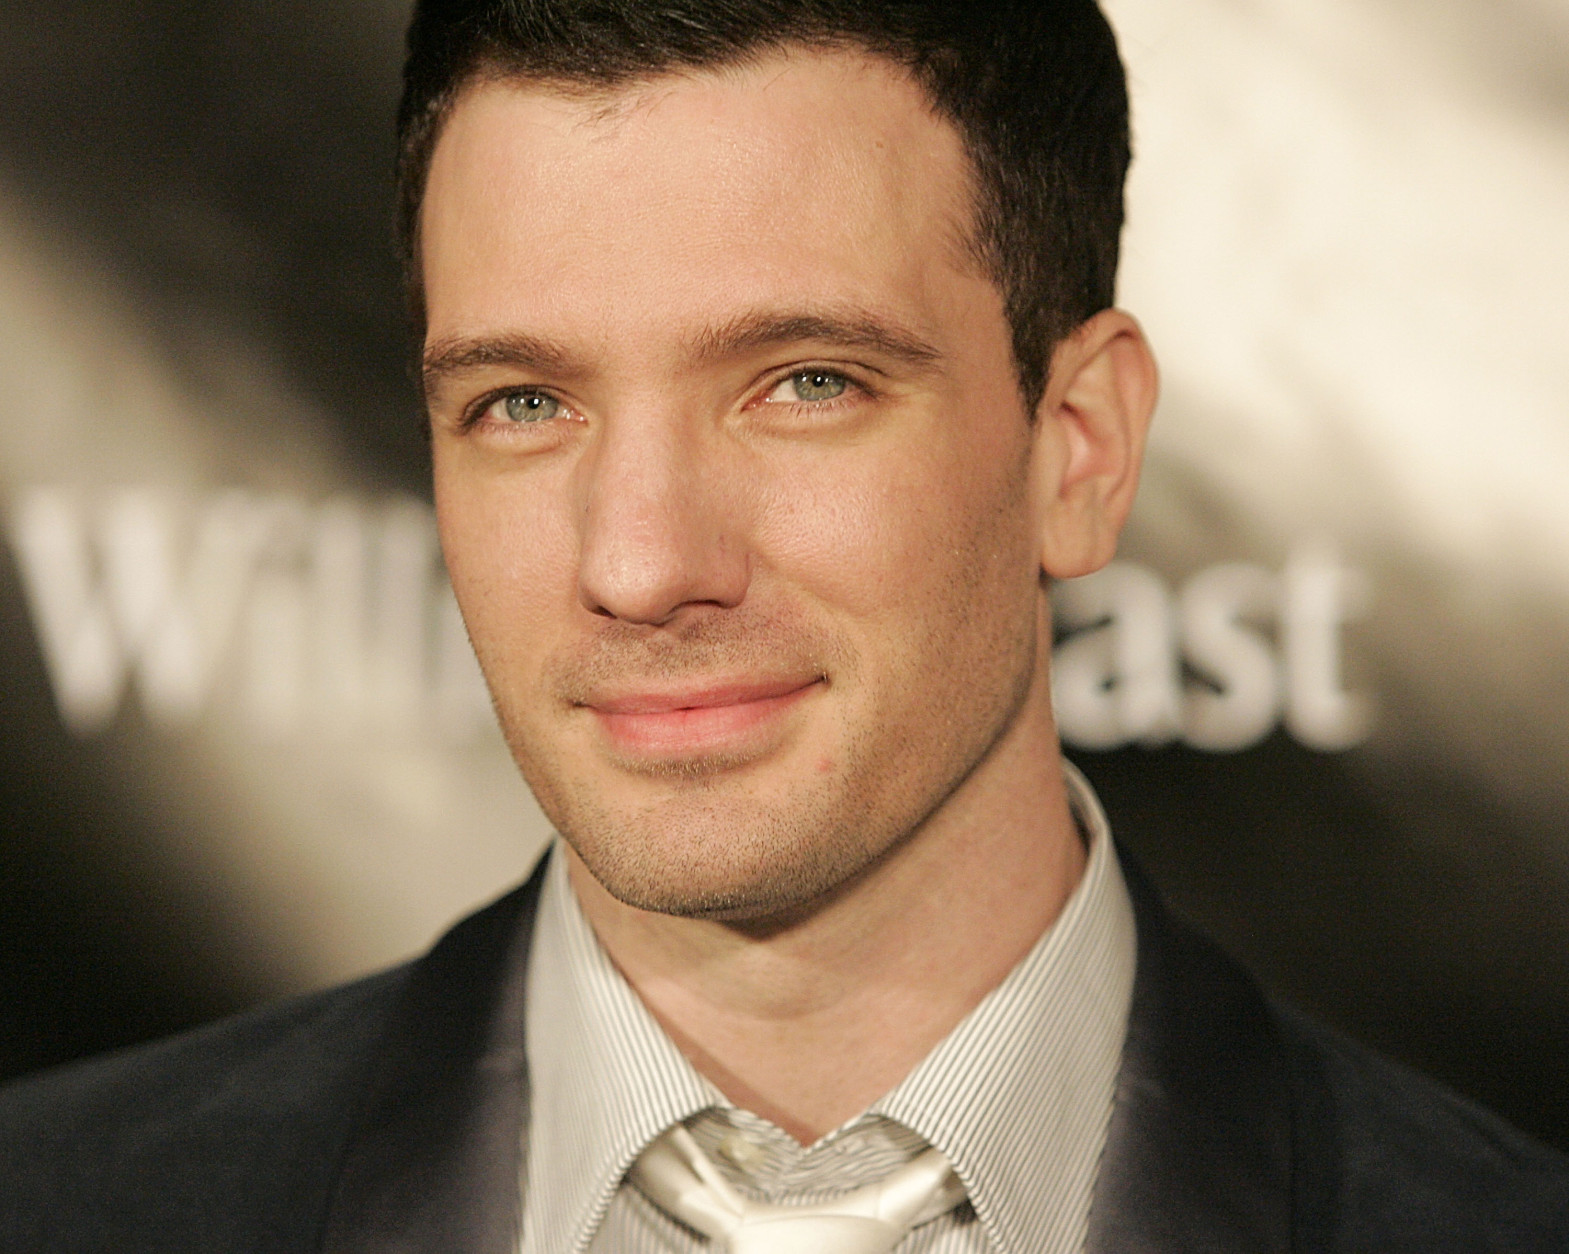 Singer J.C. Chasez poses on the red carpet during the William Rast Fashion Show at the Social Hollywood nightclub in Los Angeles, Calif. on Tuesday, October 17, 2006. (AP Photo/Dan Steinberg)